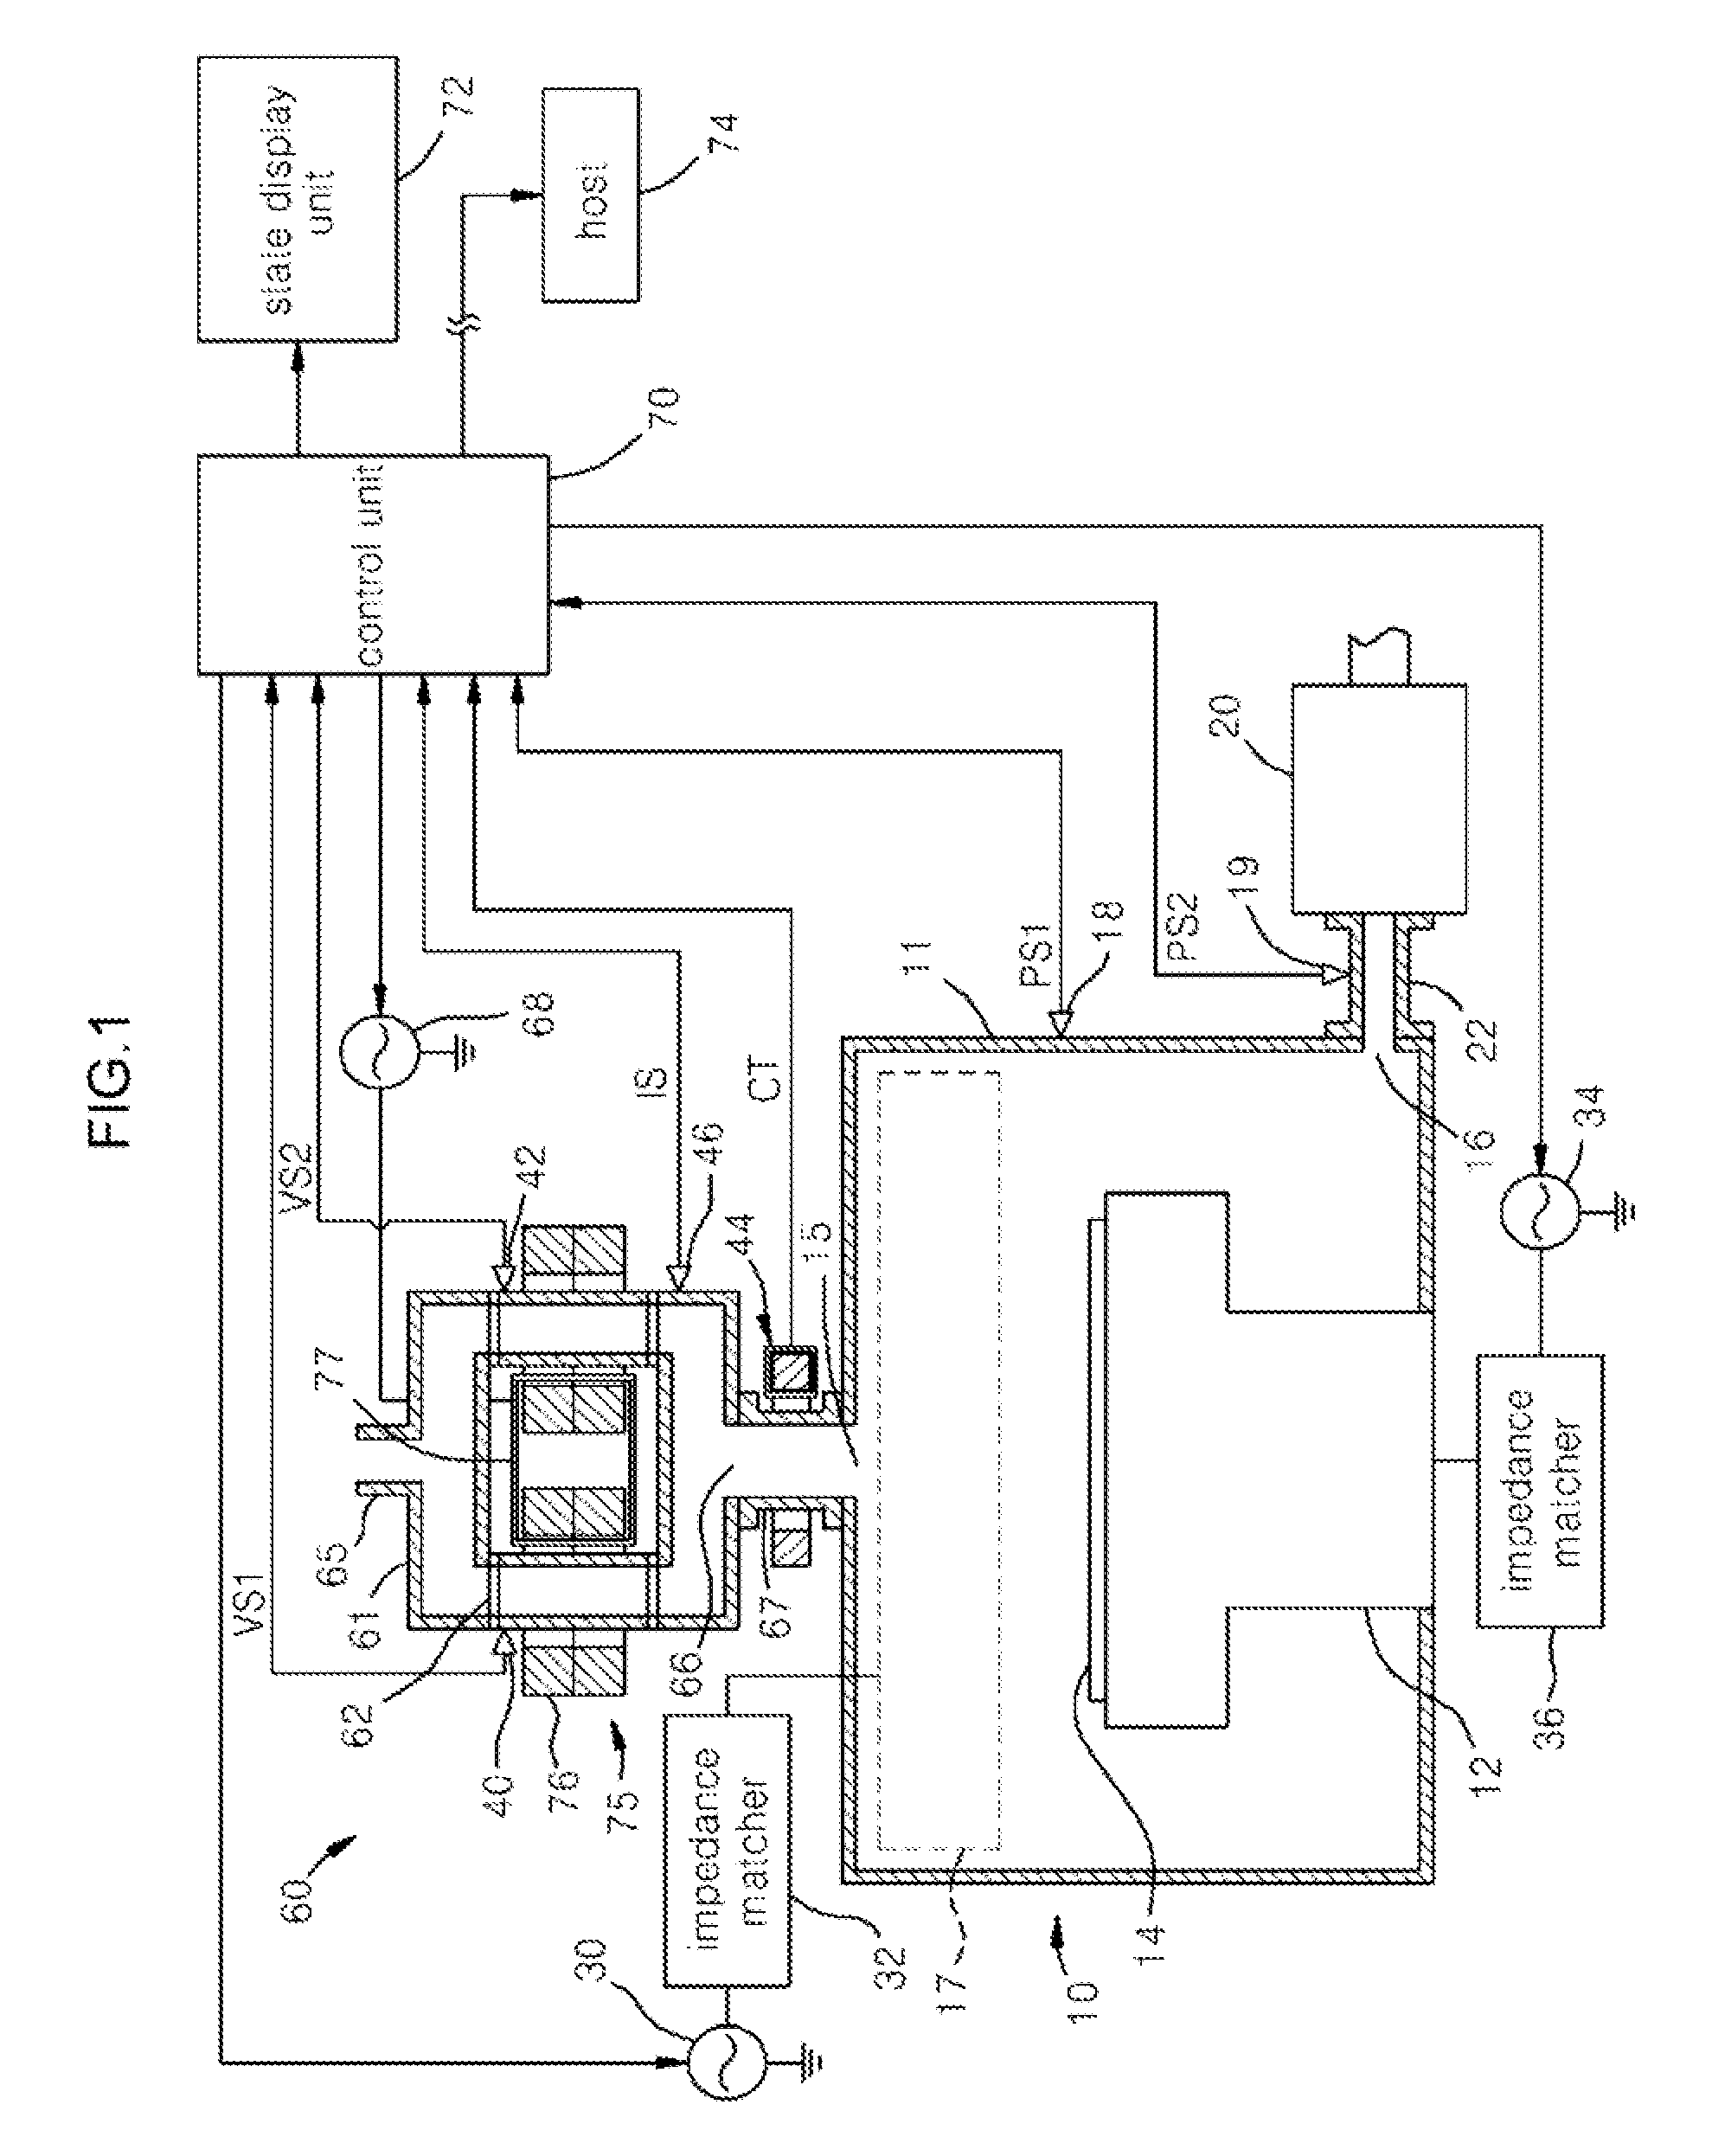 Remote plasma system having self-management function and self management method of the same